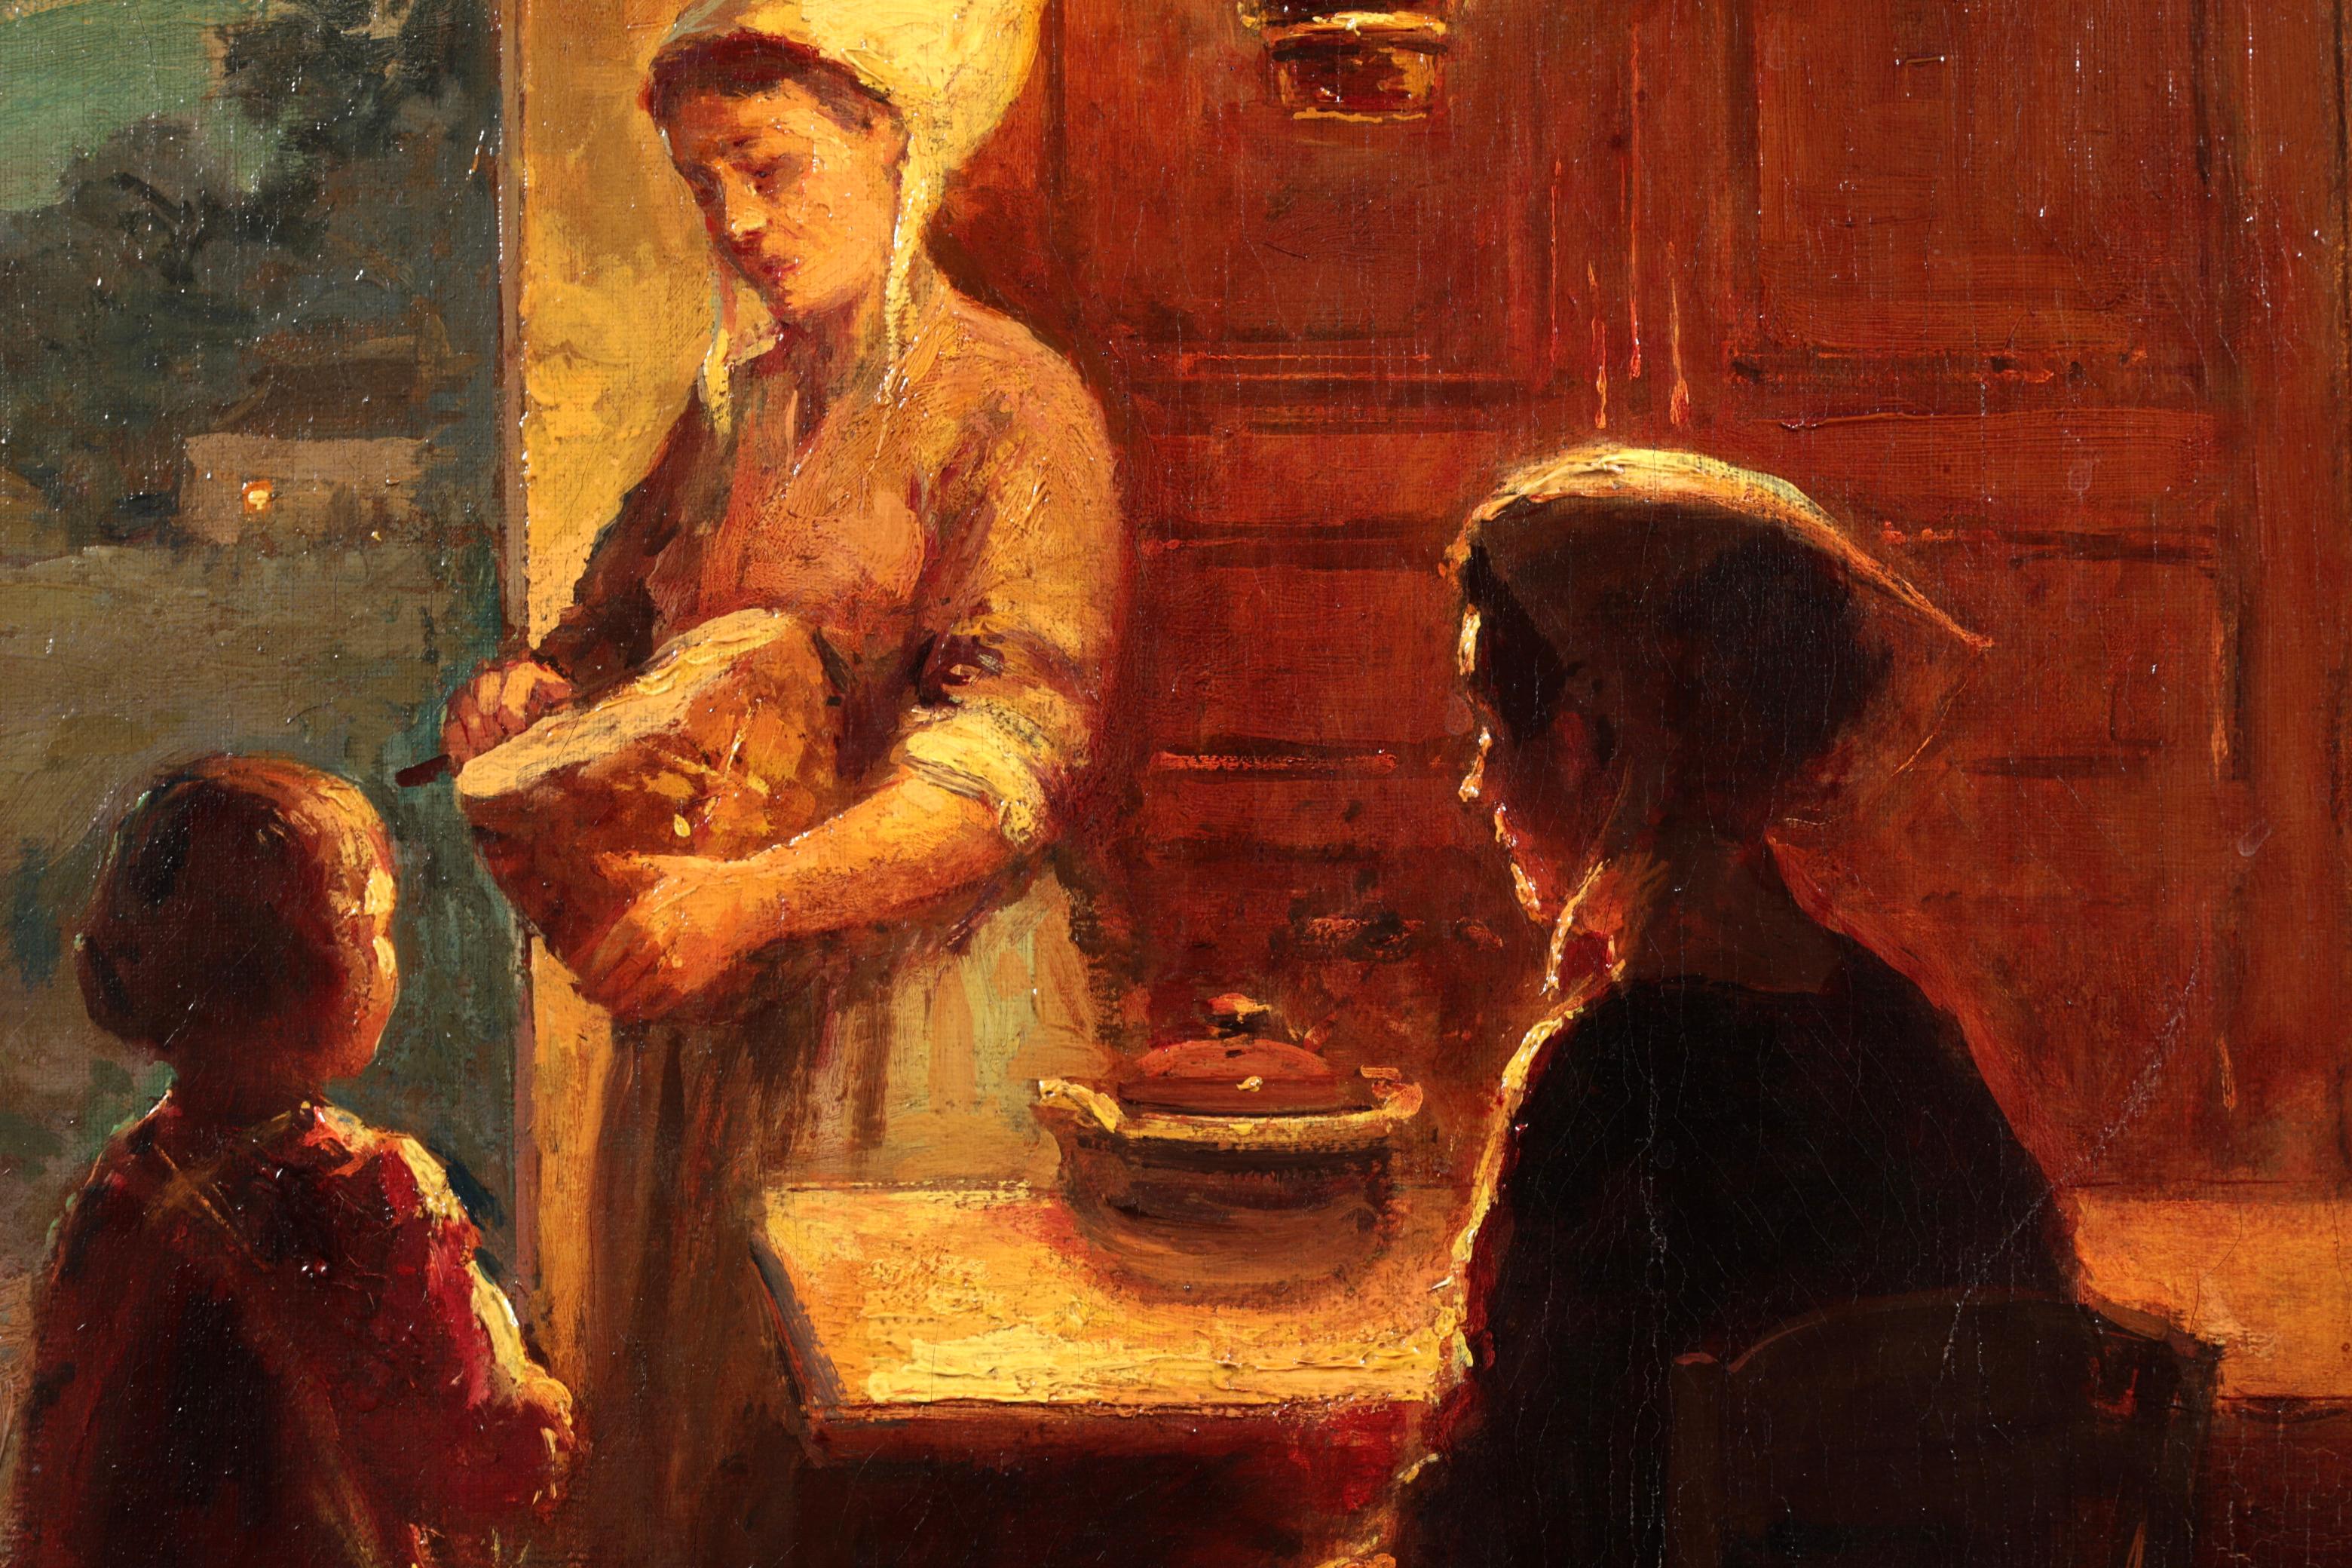 Signed figures in interior oil on canvas circa 1925 by sought after French impressionist painter Edouard Leon Cortes. This charming and nostalgic work depicts a family in a typical Breton kitchen scene. A lady is seated at the table while another